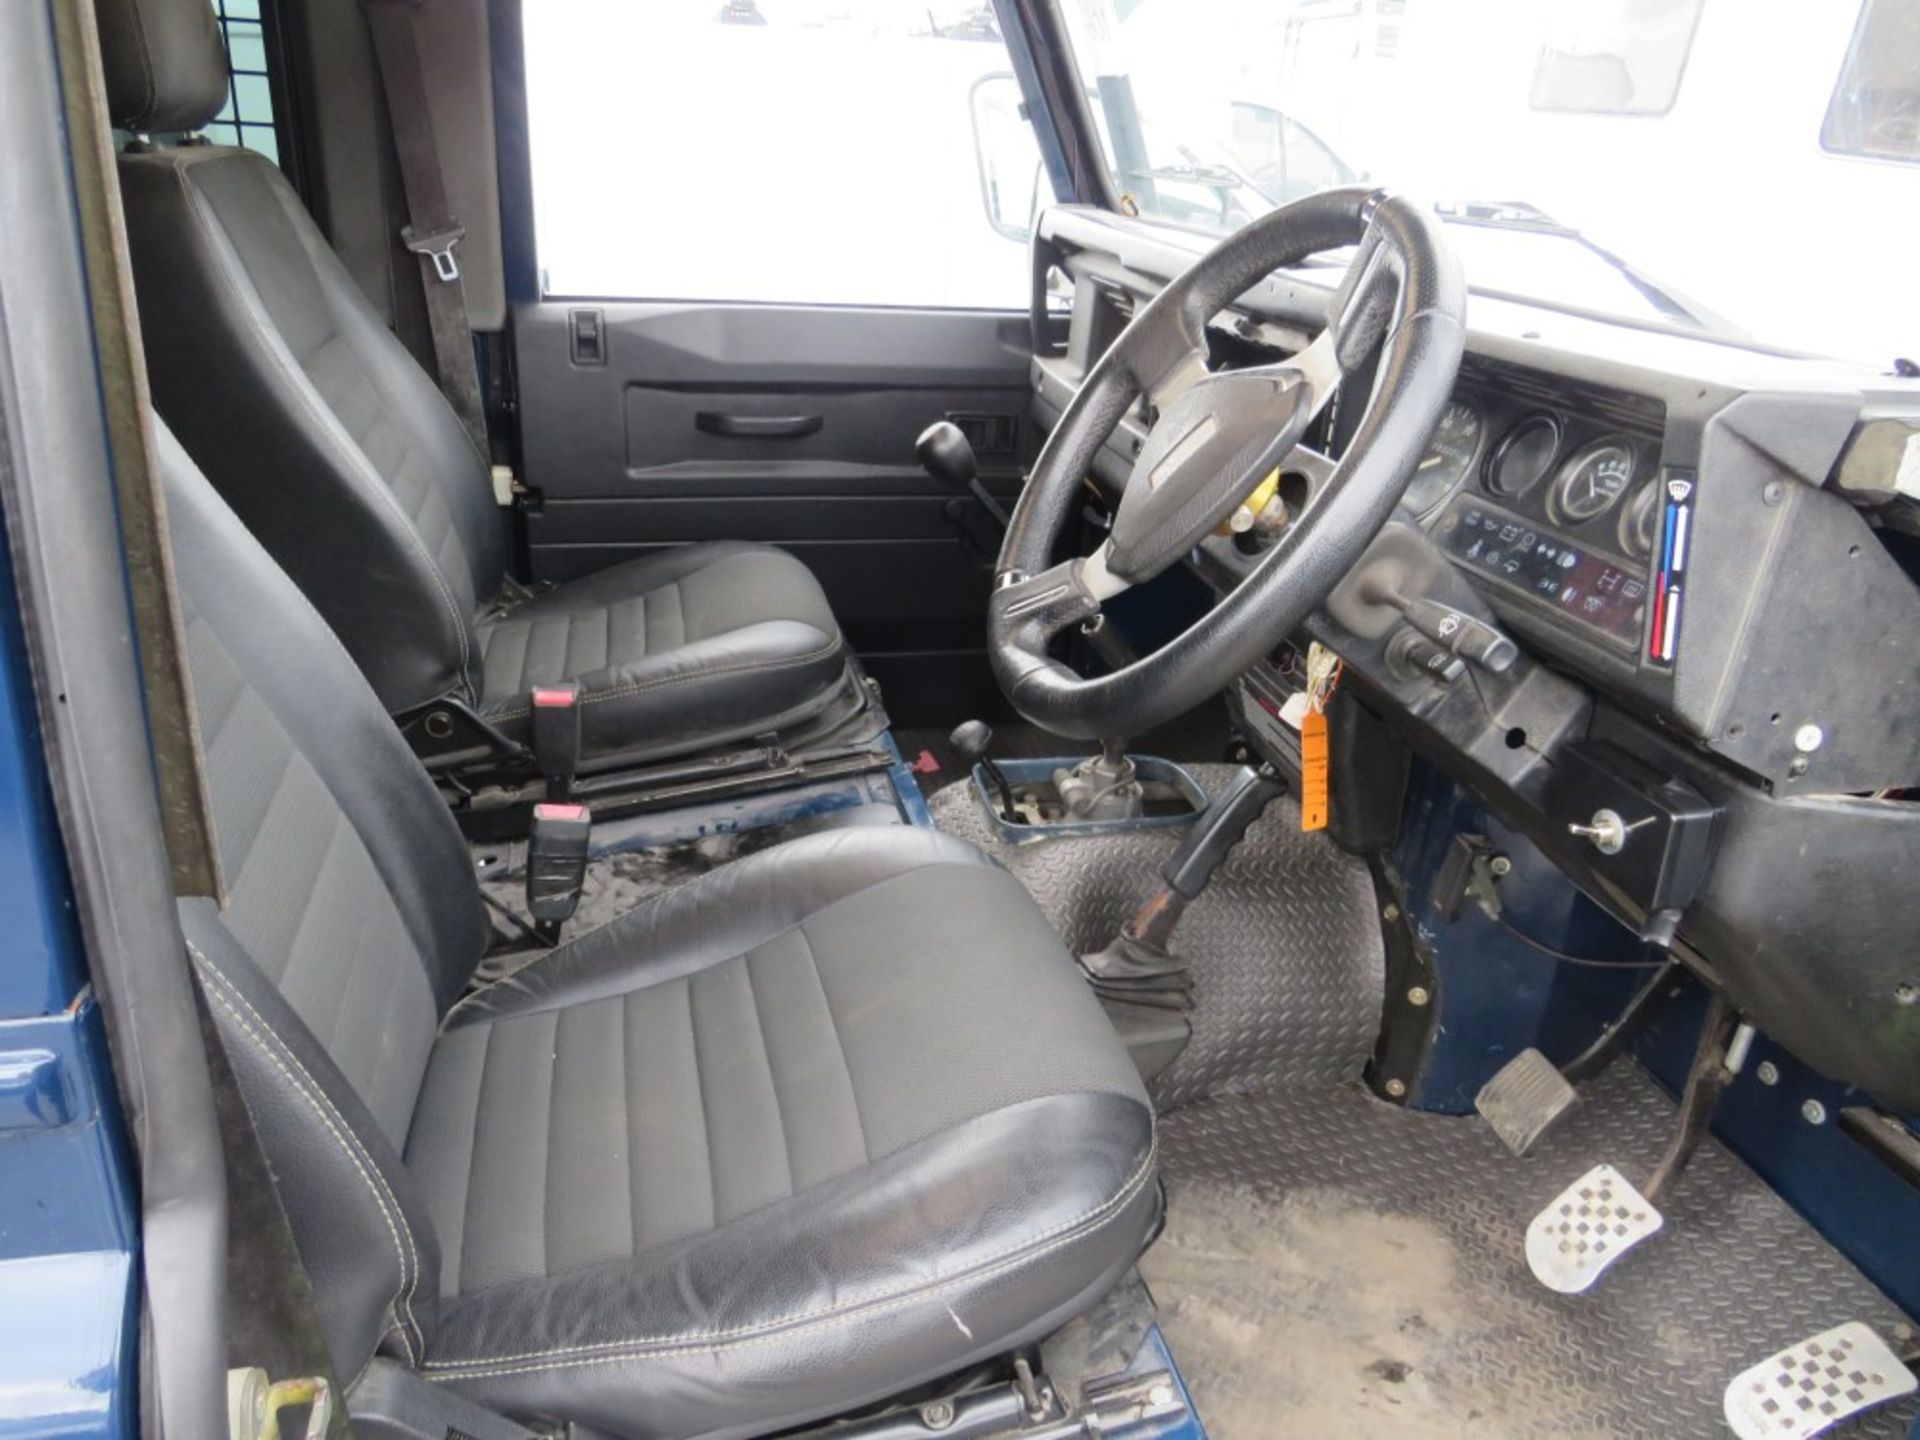 G reg LAND ROVER 90 4C SW DT DIESEL 4 X 4, NEW GLAV CHASSIS, 300 TDI ENGINE, 200 GEARBOX, NEW DOORS - Image 5 of 6